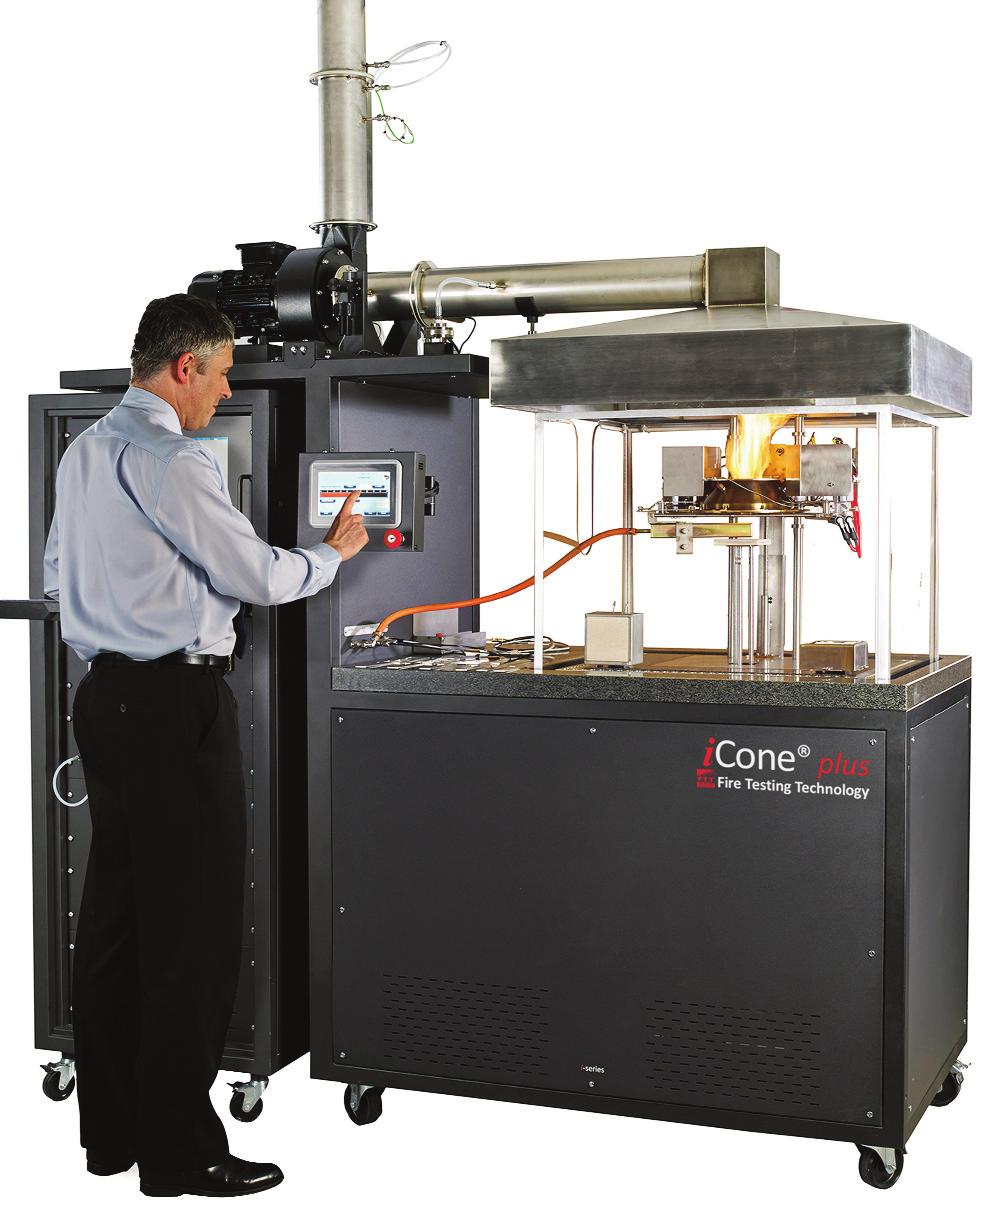 Unique features of icone plus Remote cone assembly positioning control, so that heater specimen surface separation can be adjusted pre and mid test, to facilitate testing of intumescing or thermally